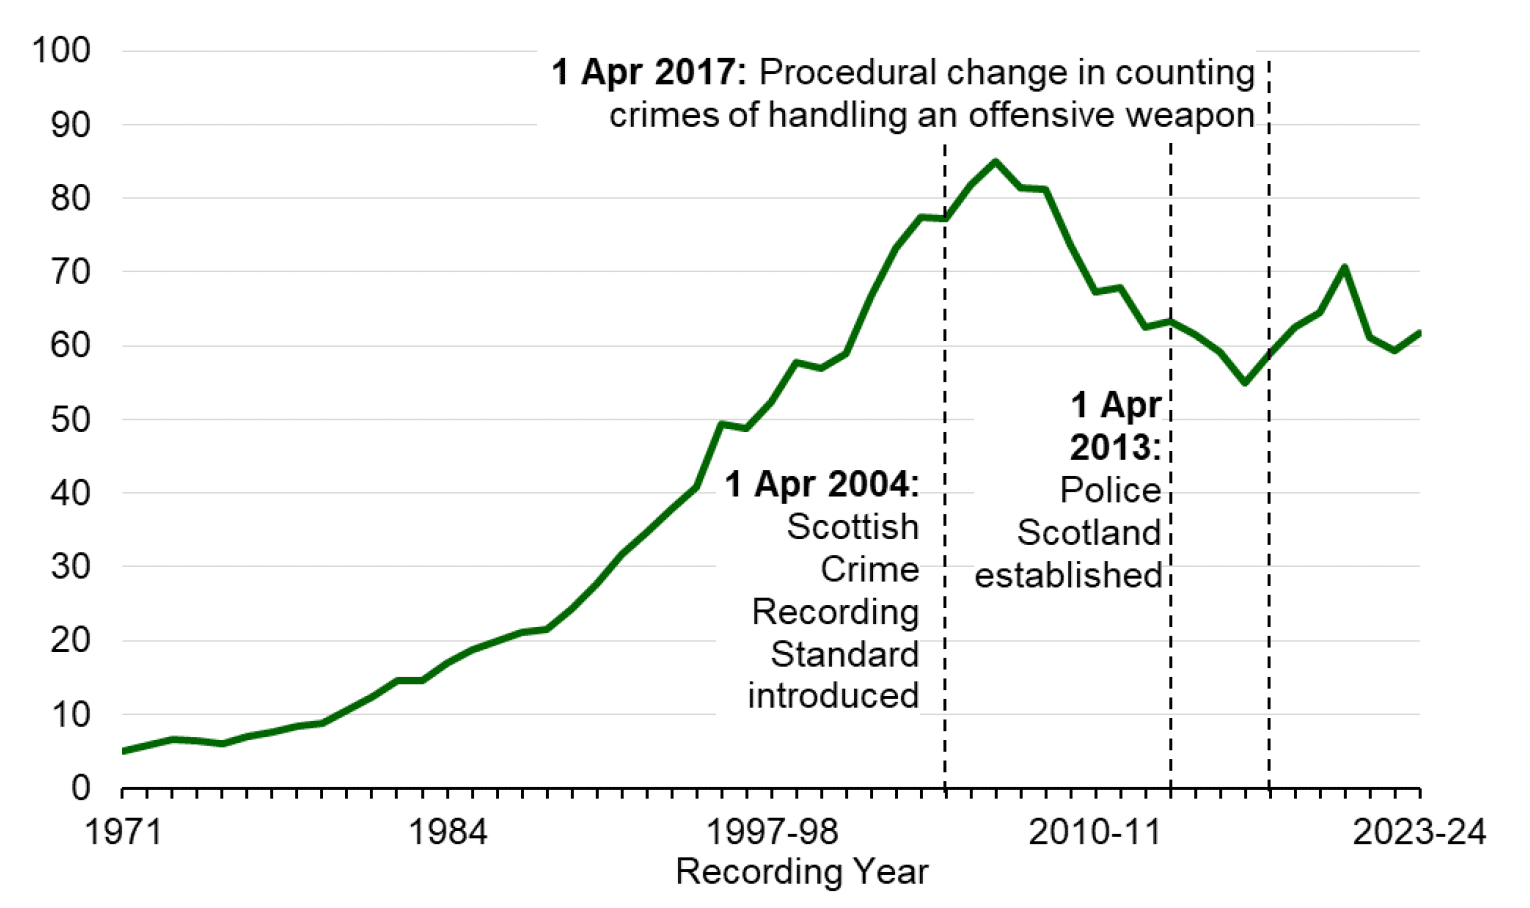 A line chart showing that the level of Crimes against society increased greatly from 1971 to 2006-07 when they peaked. They have then reduced substantially since despite some fluctuation and have remained above 50,000 since 1997-98.